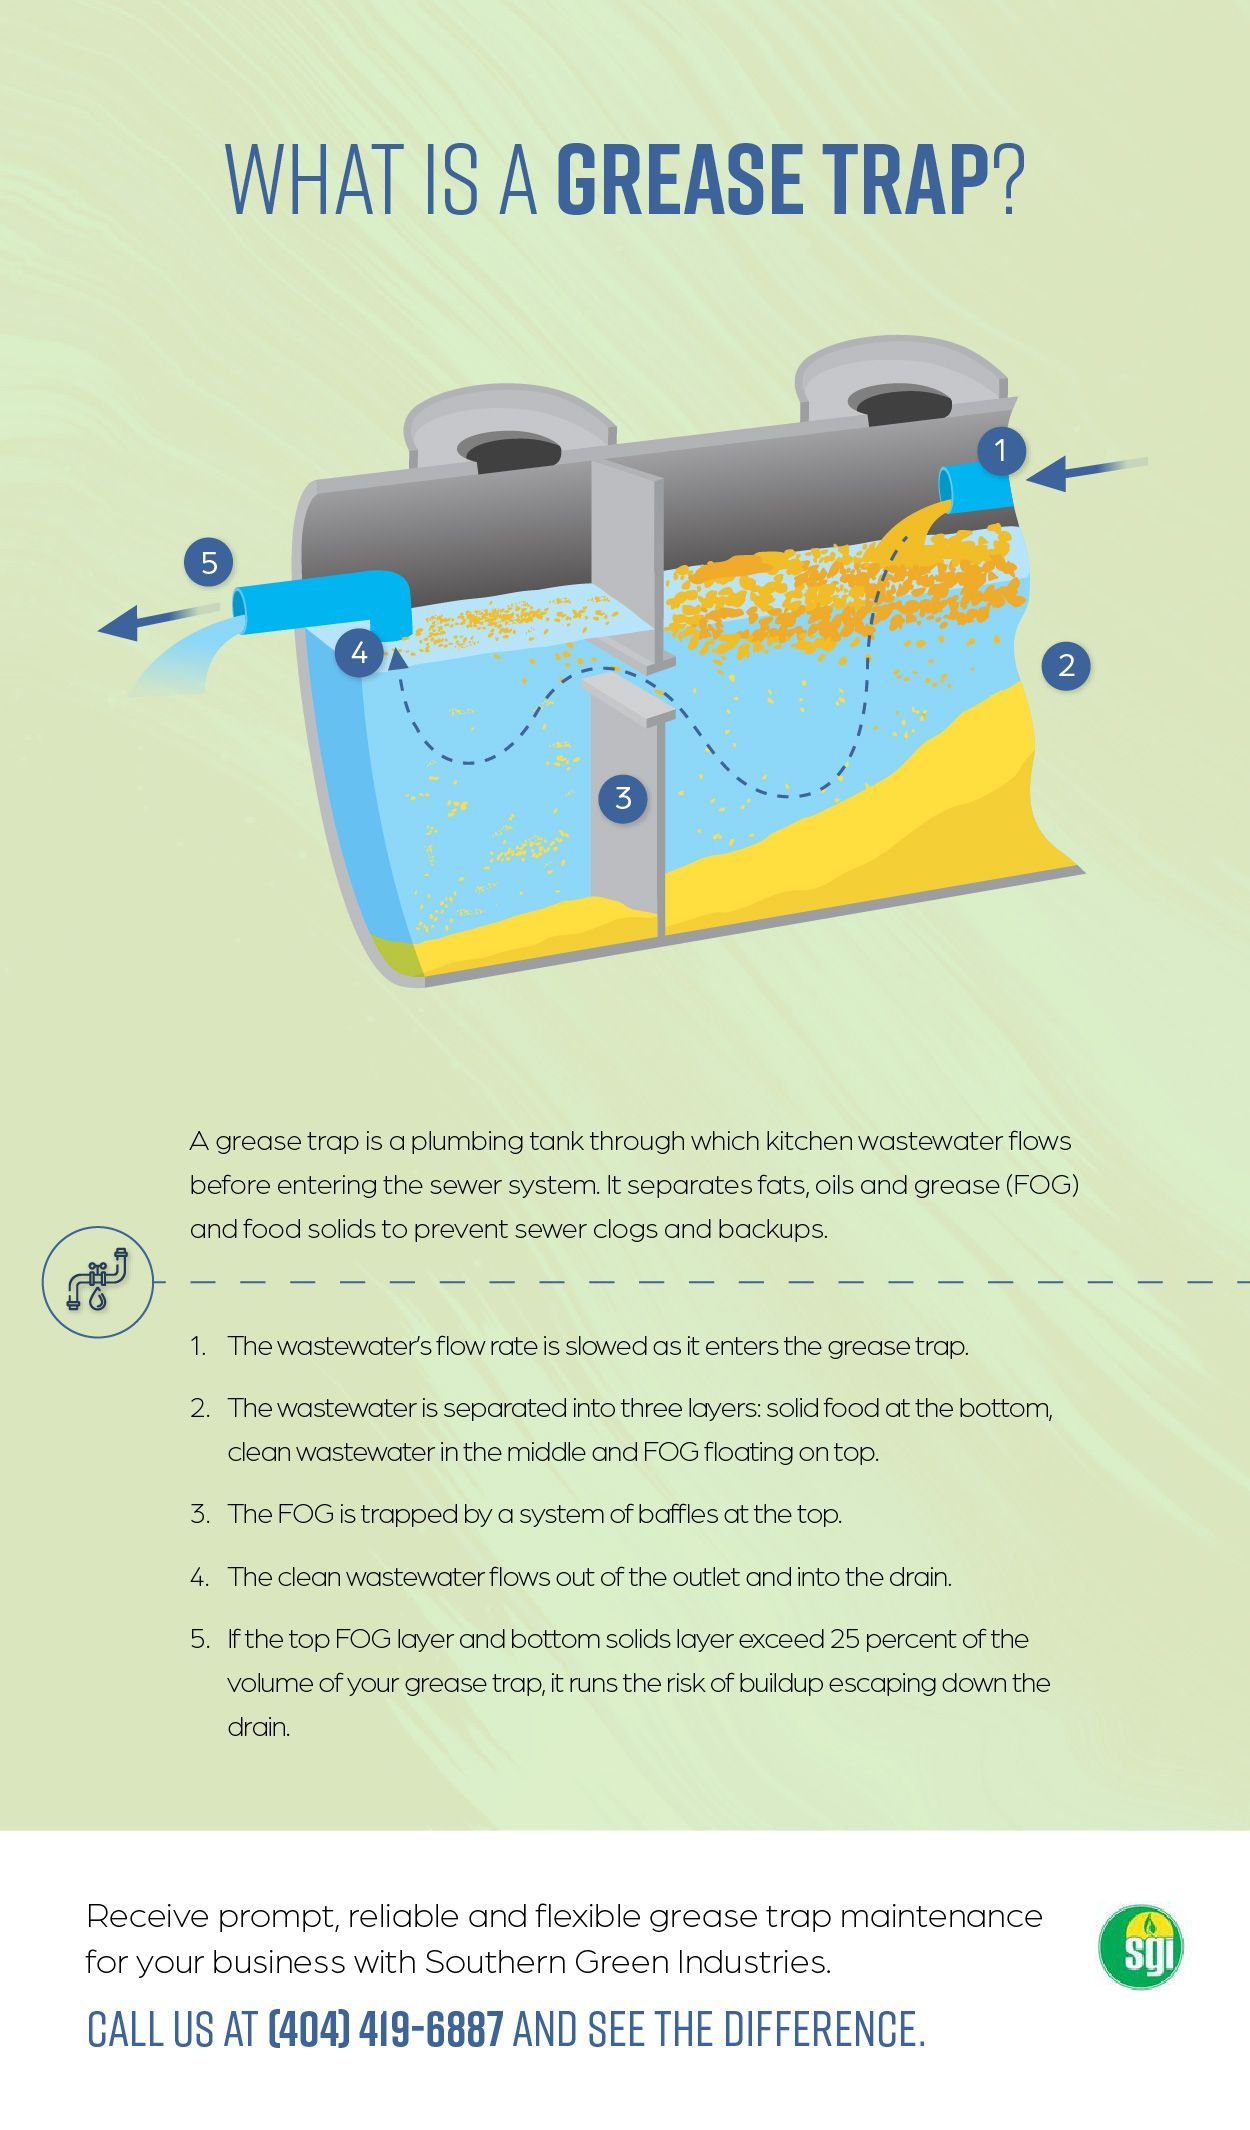 What is a grease trap?